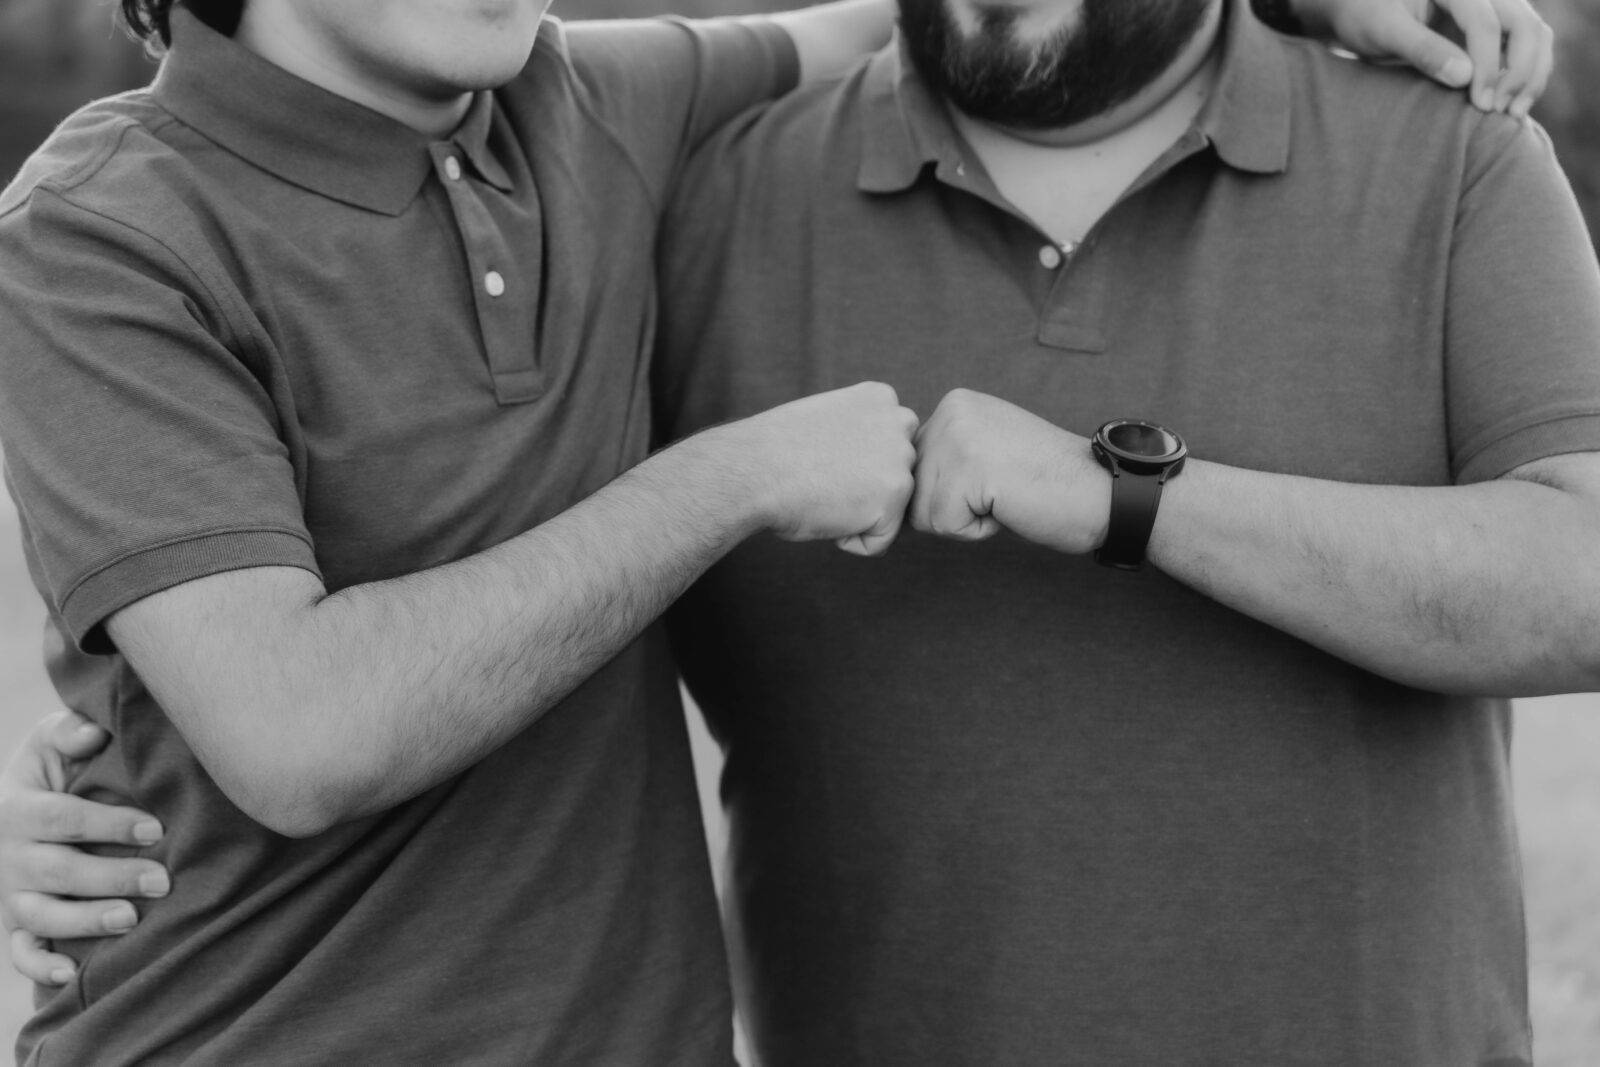 Fist bump photo in black and white during a family photo session.